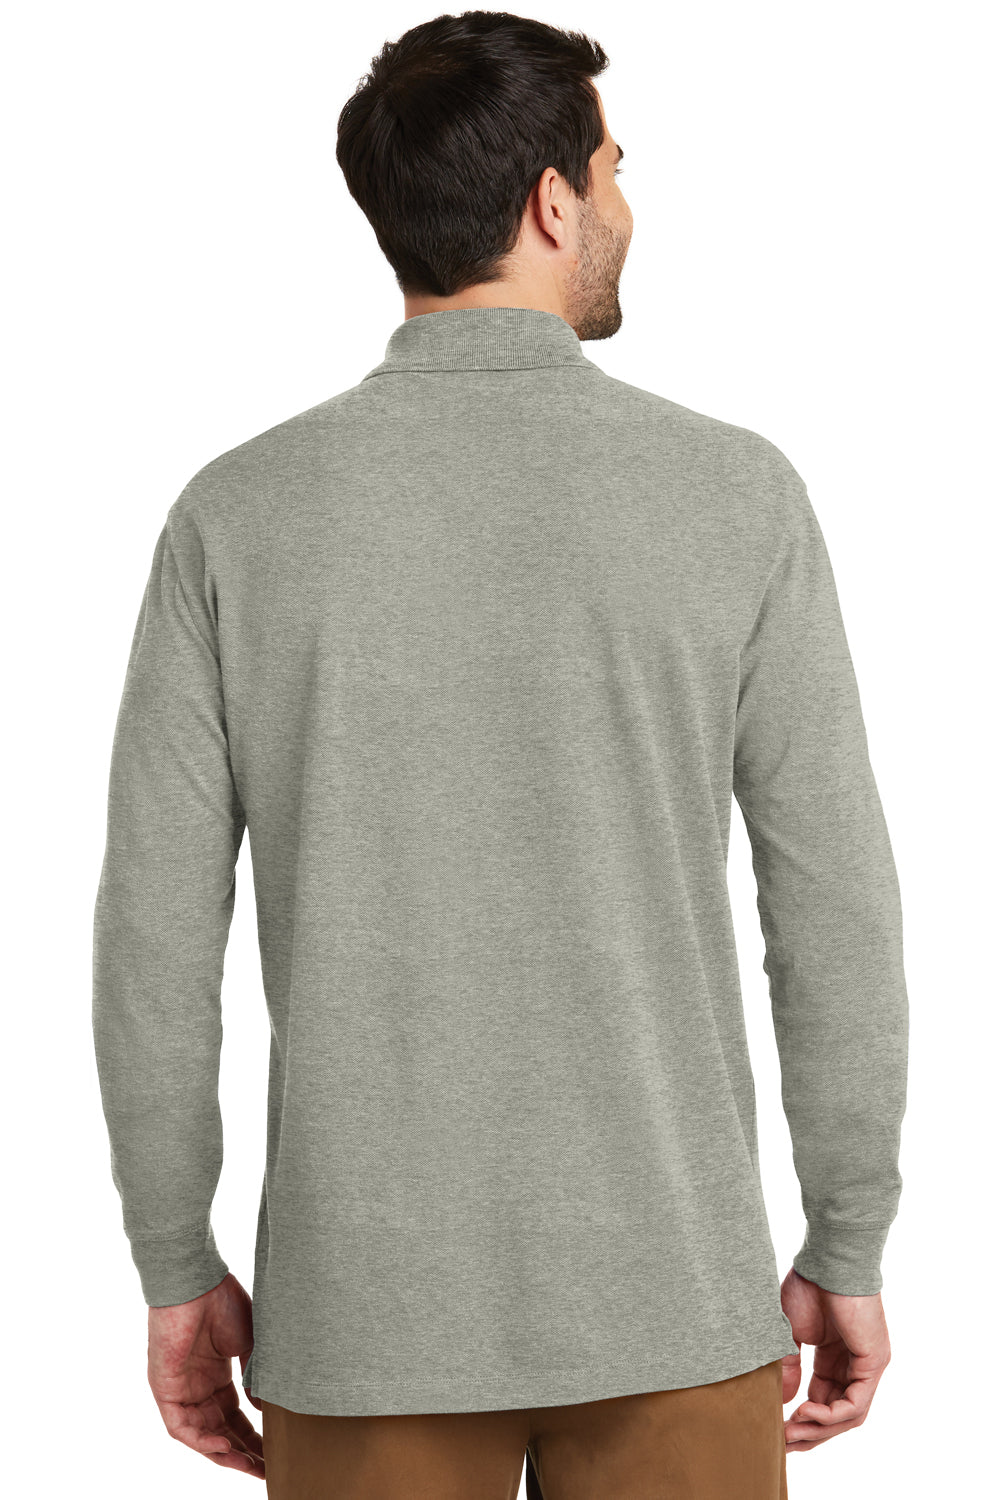 Port Authority K8000LS Mens Wrinkle Resistant Long Sleeve Polo Shirt Heather Oxford Grey Back